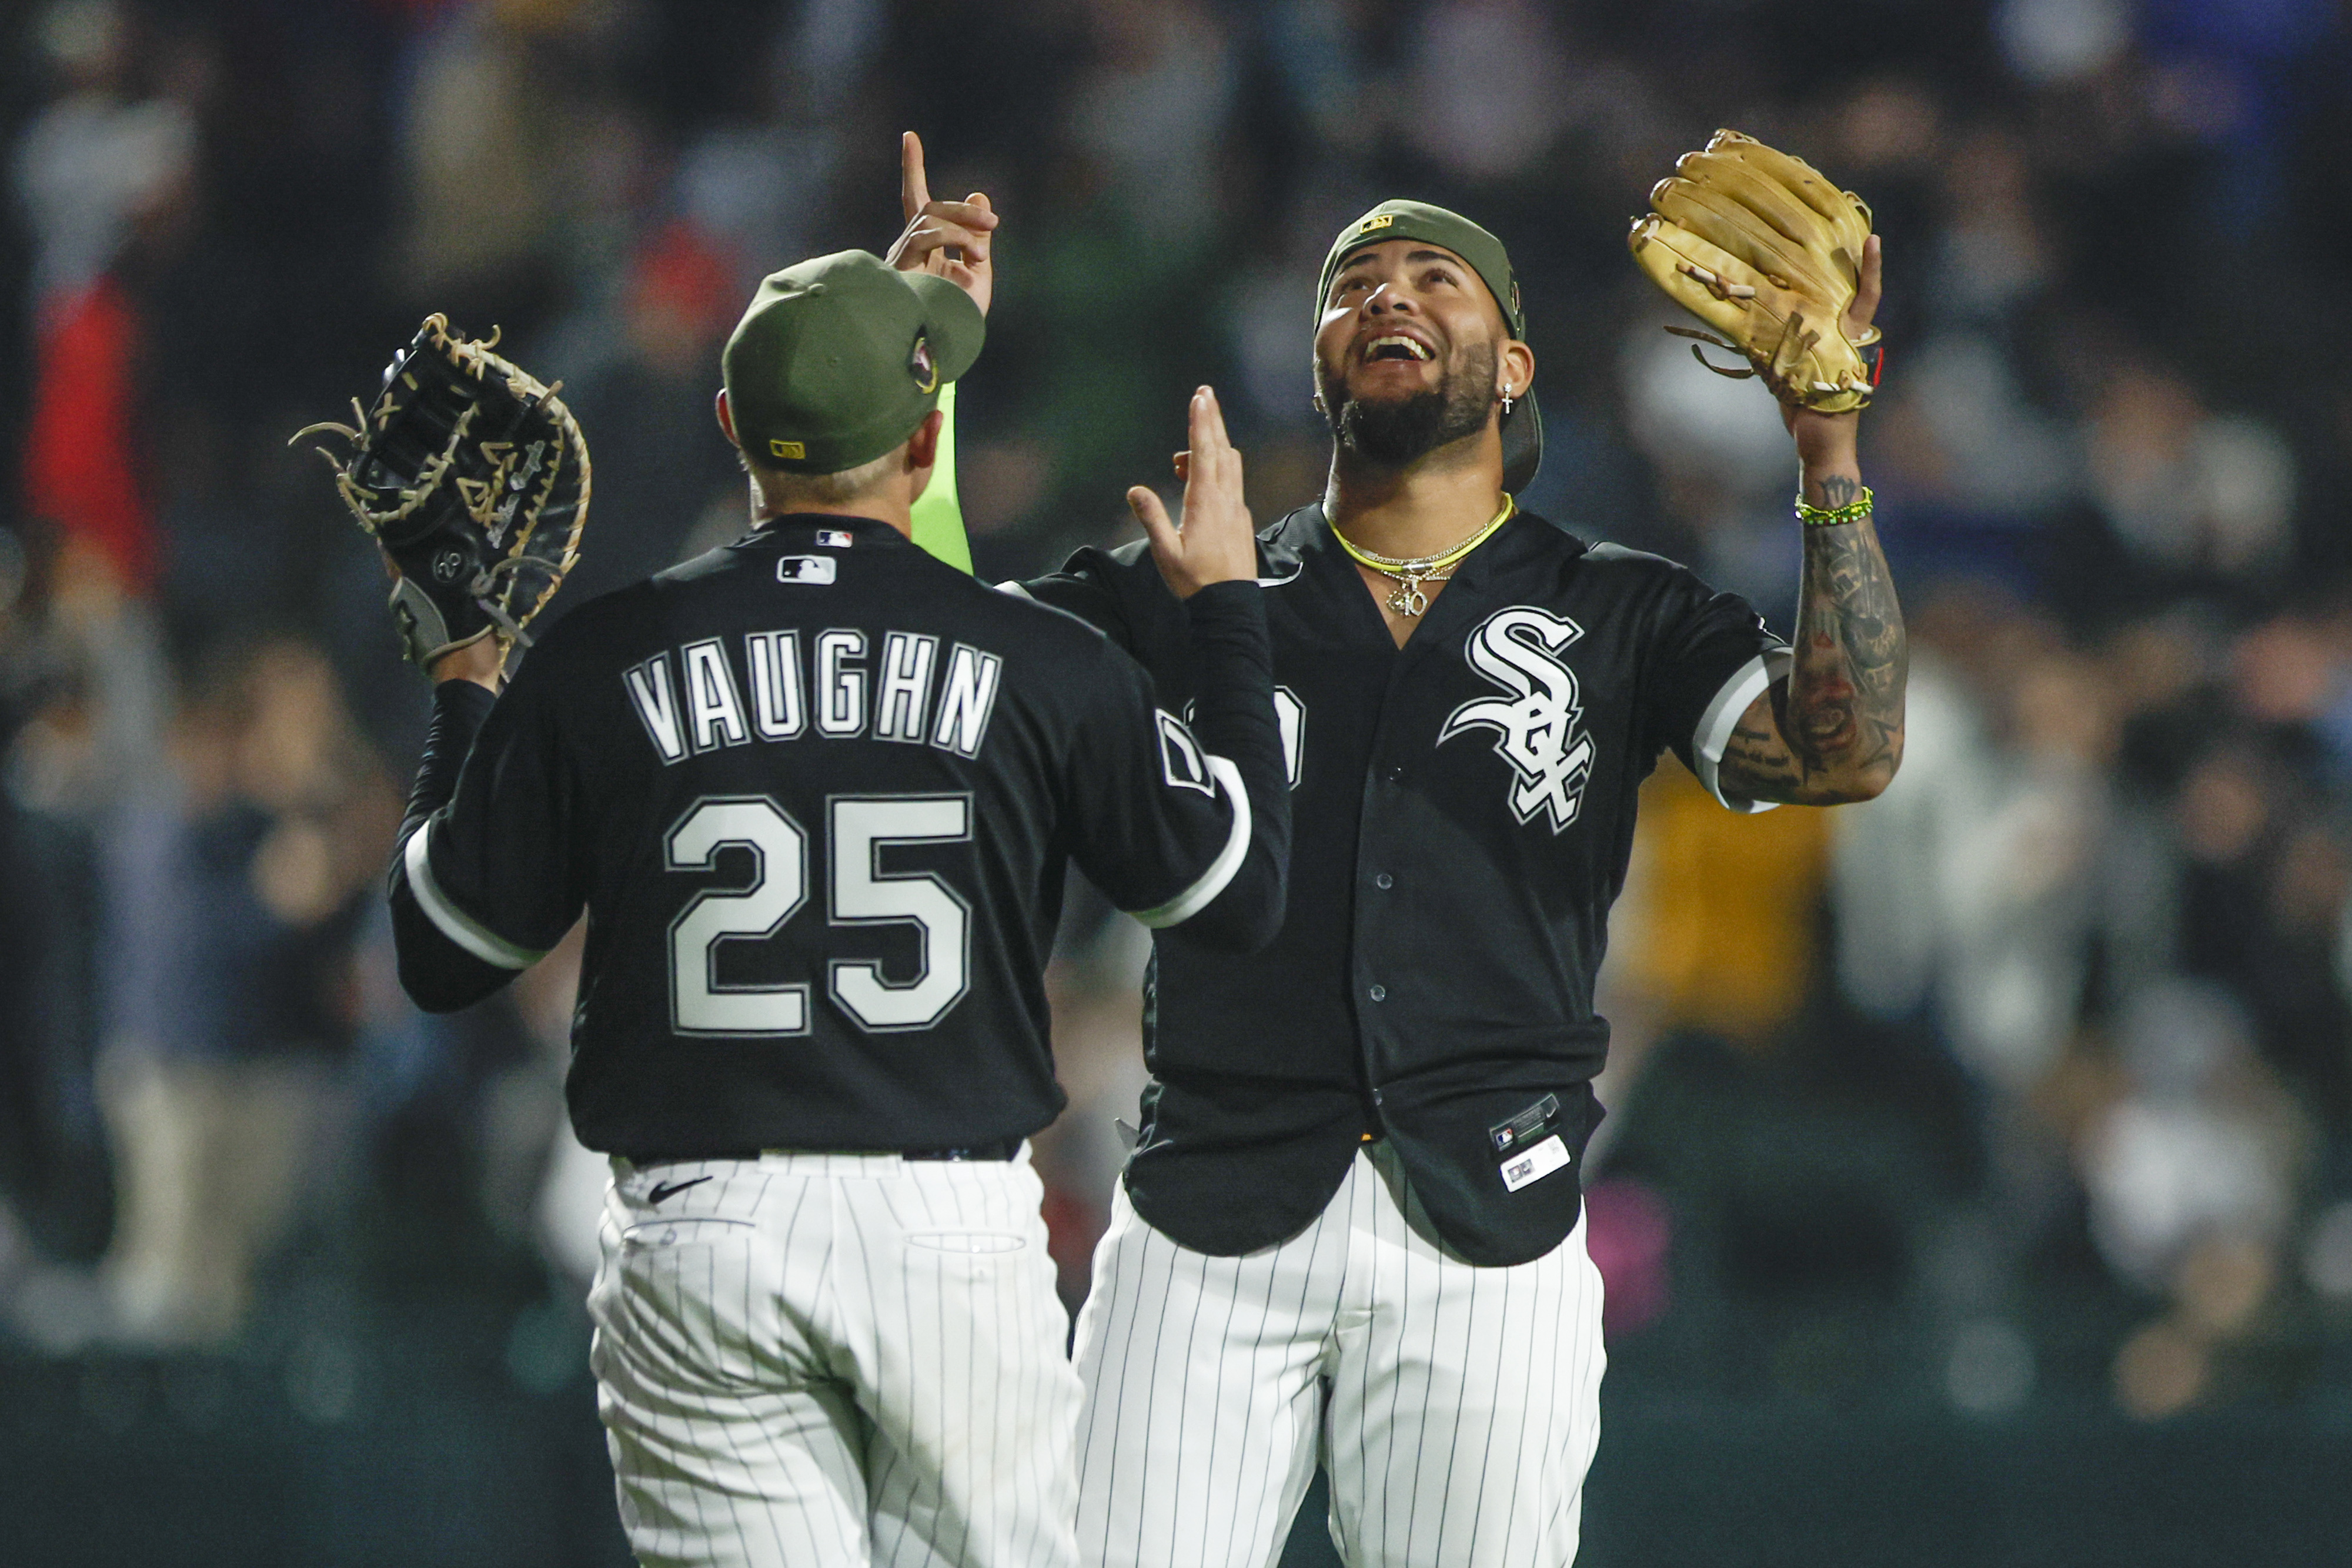 Andrew Vaughn and Yoan Moncada of the Chicago White Sox celebrate